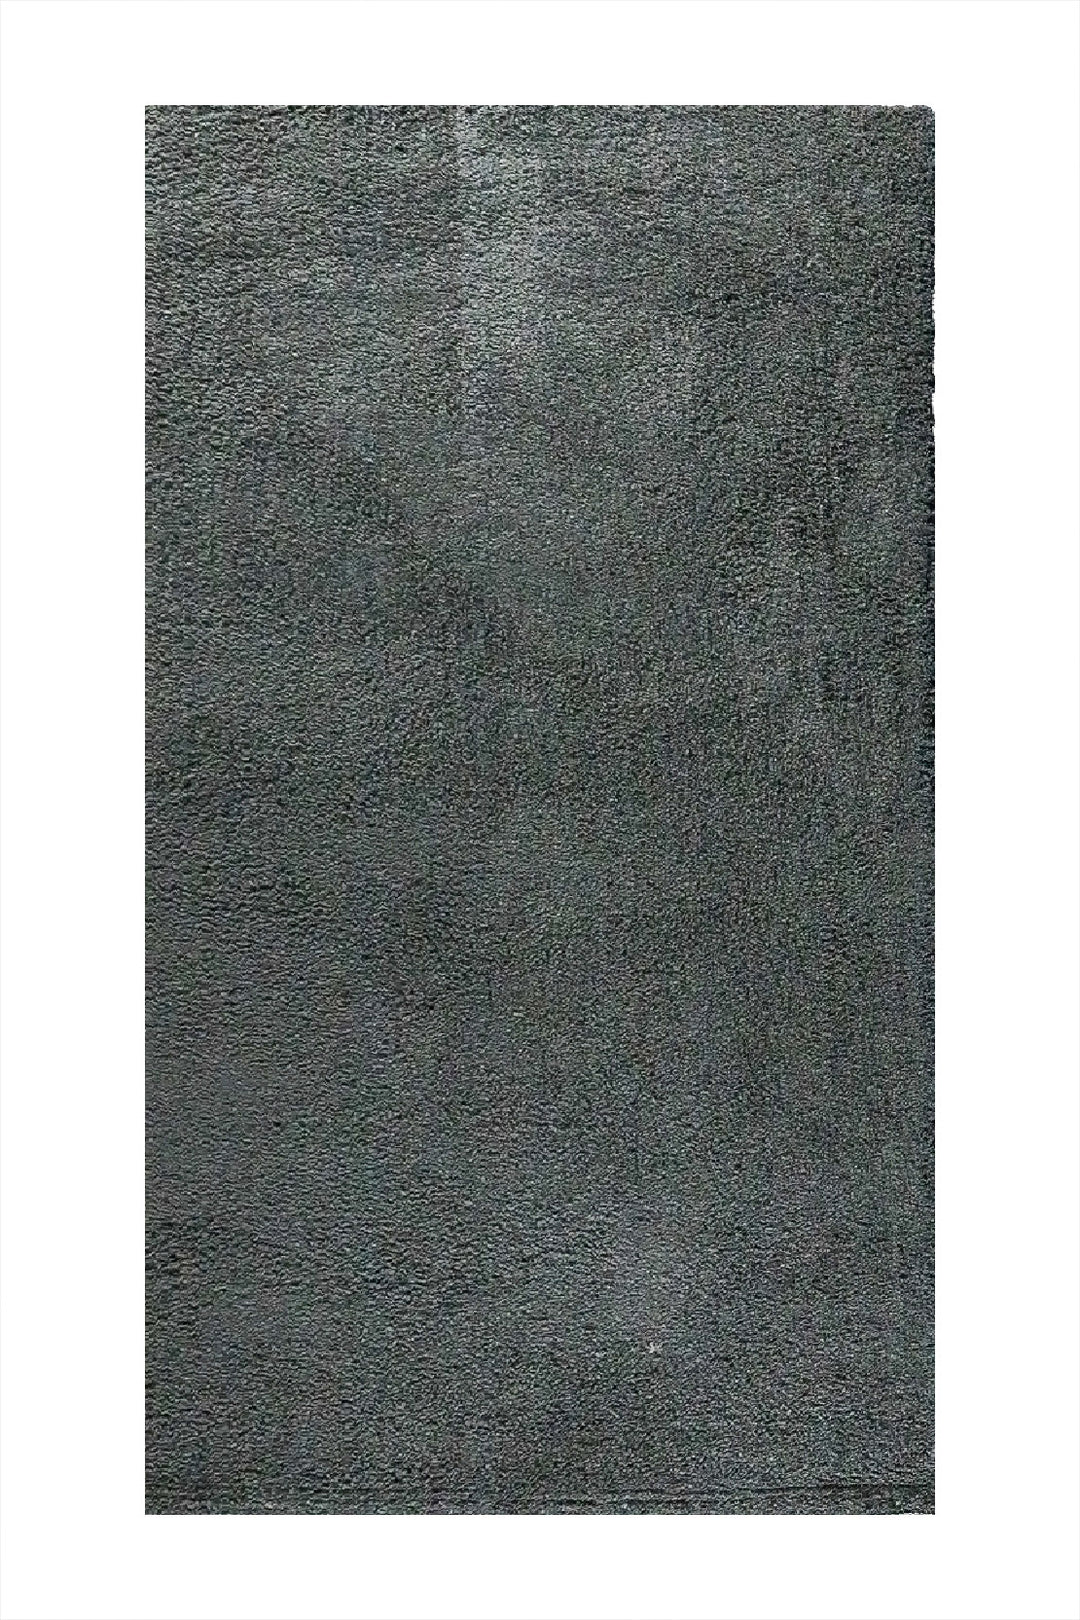 Turkish Modern Festival 2 Rug -  3.28 x 6.56 FT - Gray -  Superior Comfort, Modern Style Accent Rugs